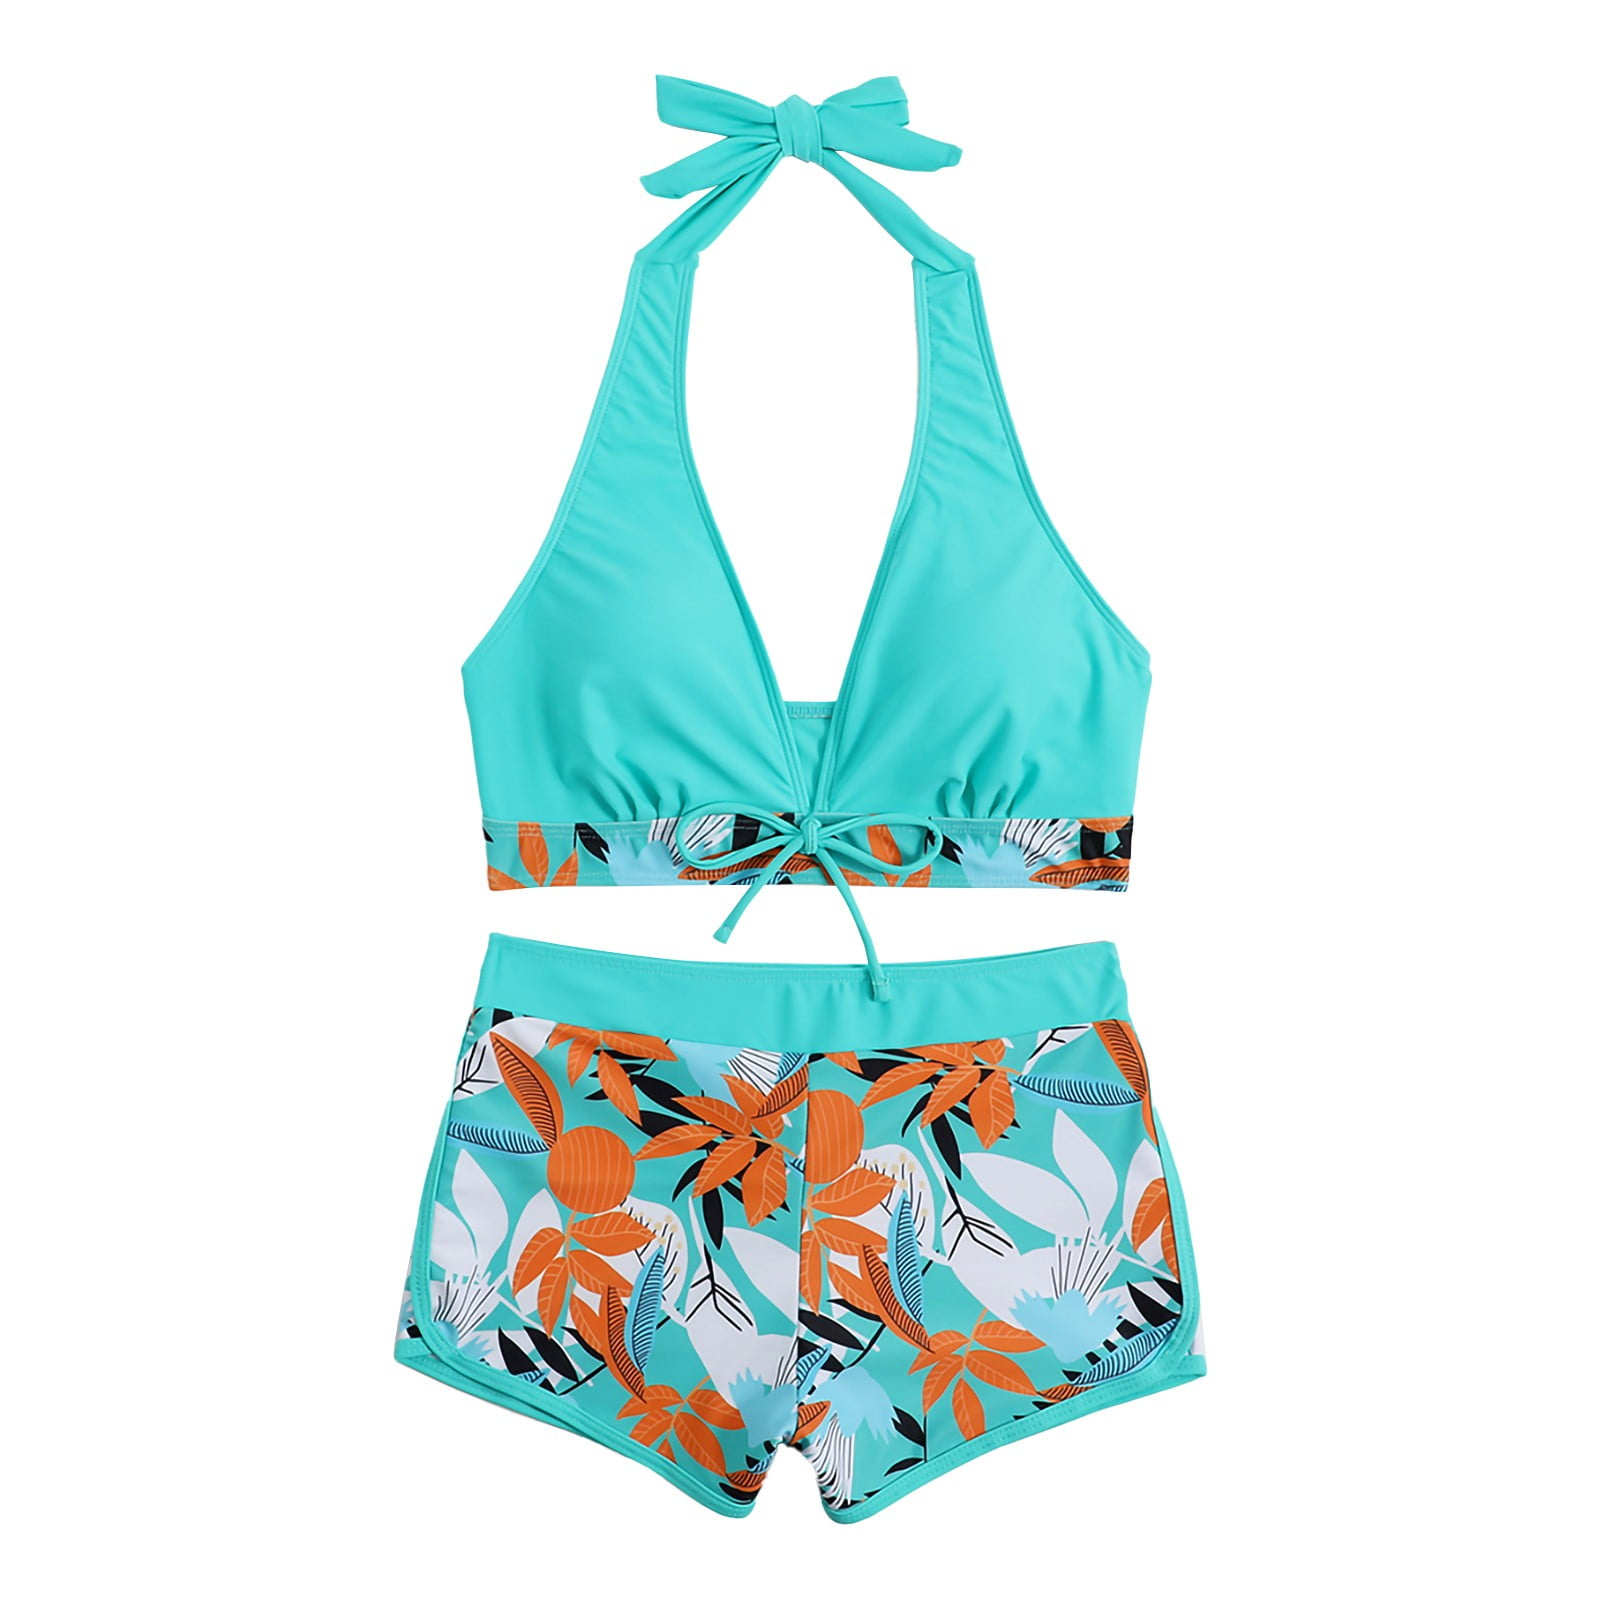 Two Piece Swimsuit For Women High Waisted Bikini Sets High Cut Swimsuit ...